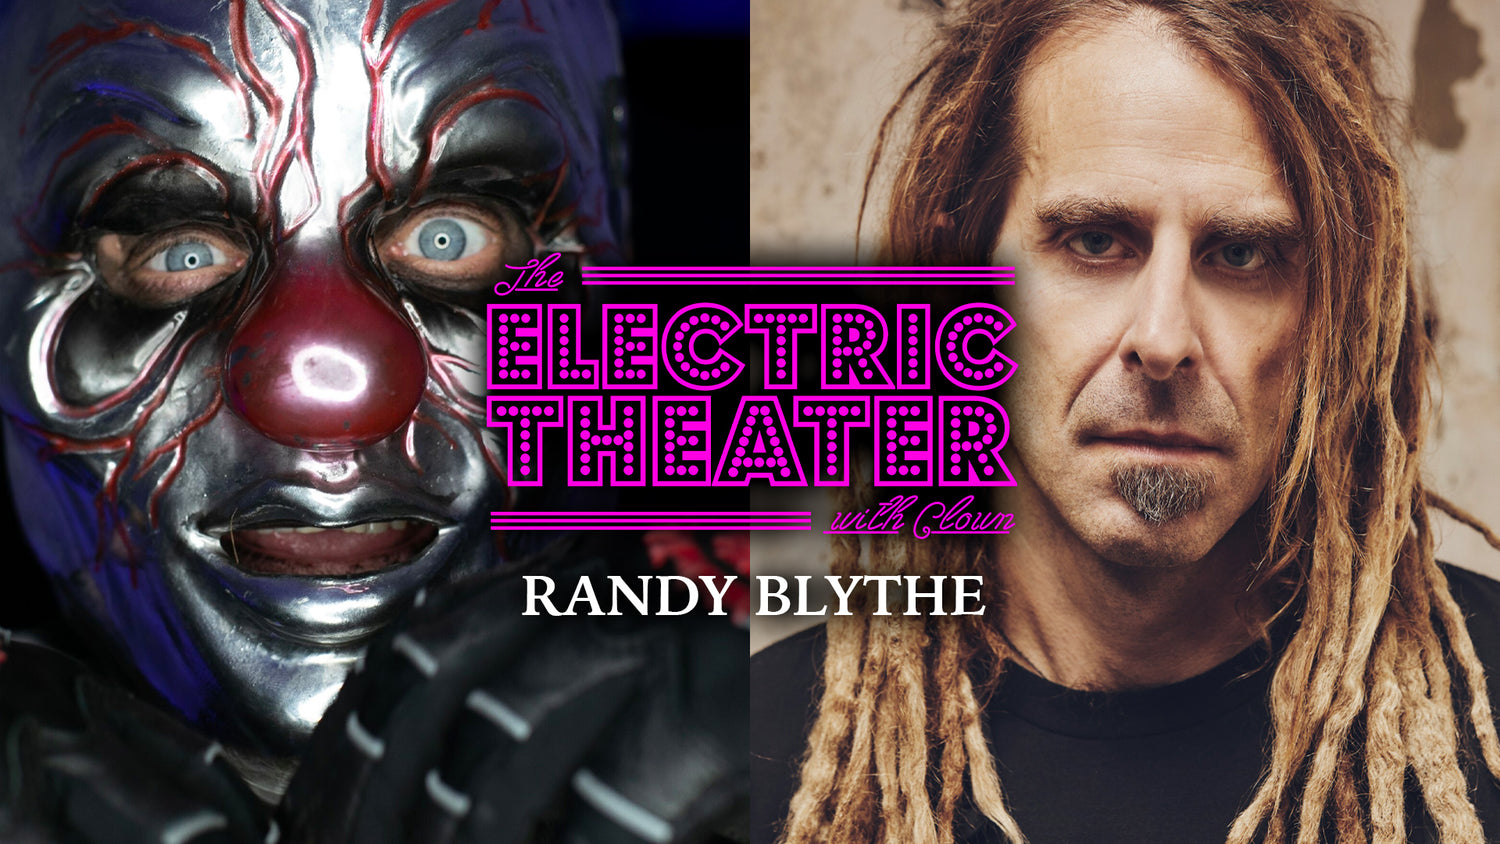 Compelling art, stepping outside of the comfort zone, and living in the moment - Randy Blythe steps into The Electric Theater